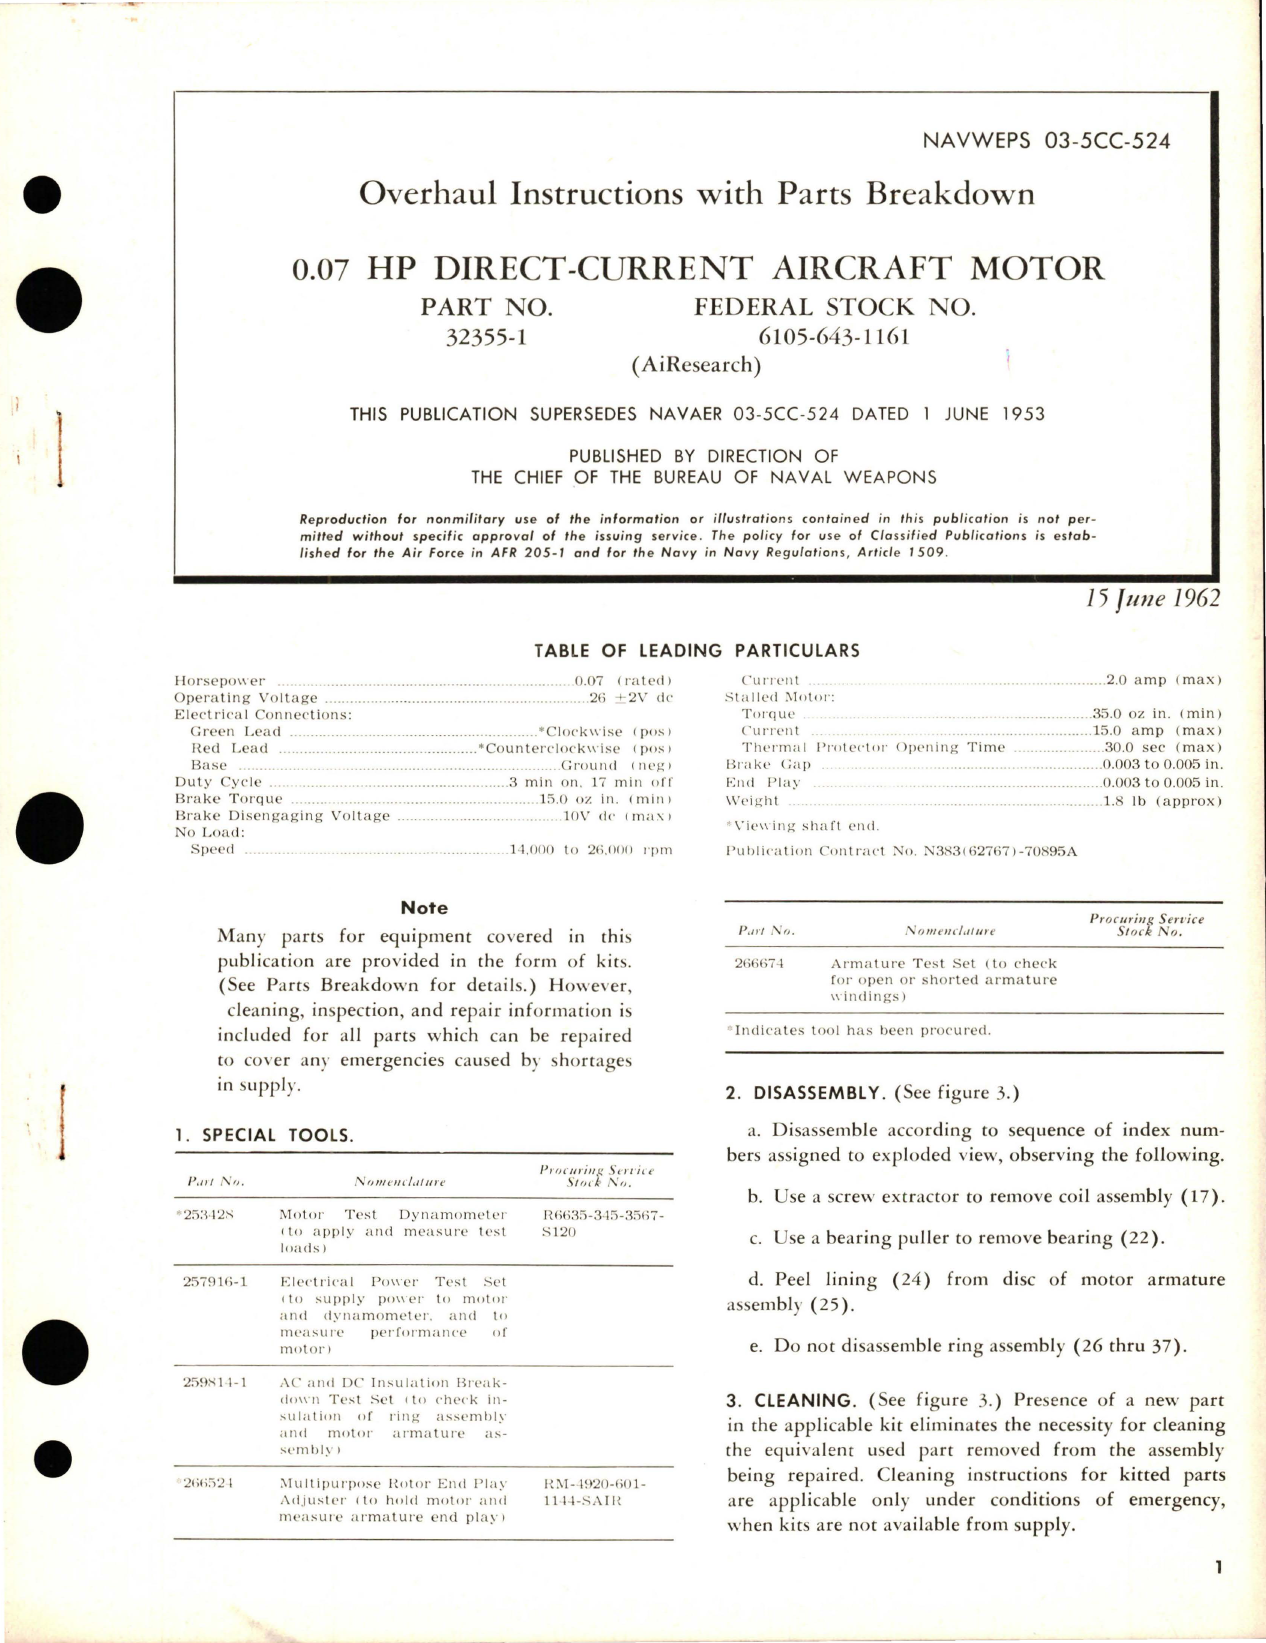 Sample page 1 from AirCorps Library document: Overhaul Instructions with Parts Breakdown for Direct-Current Aircraft Motor 0.07HP - Part 32355-1